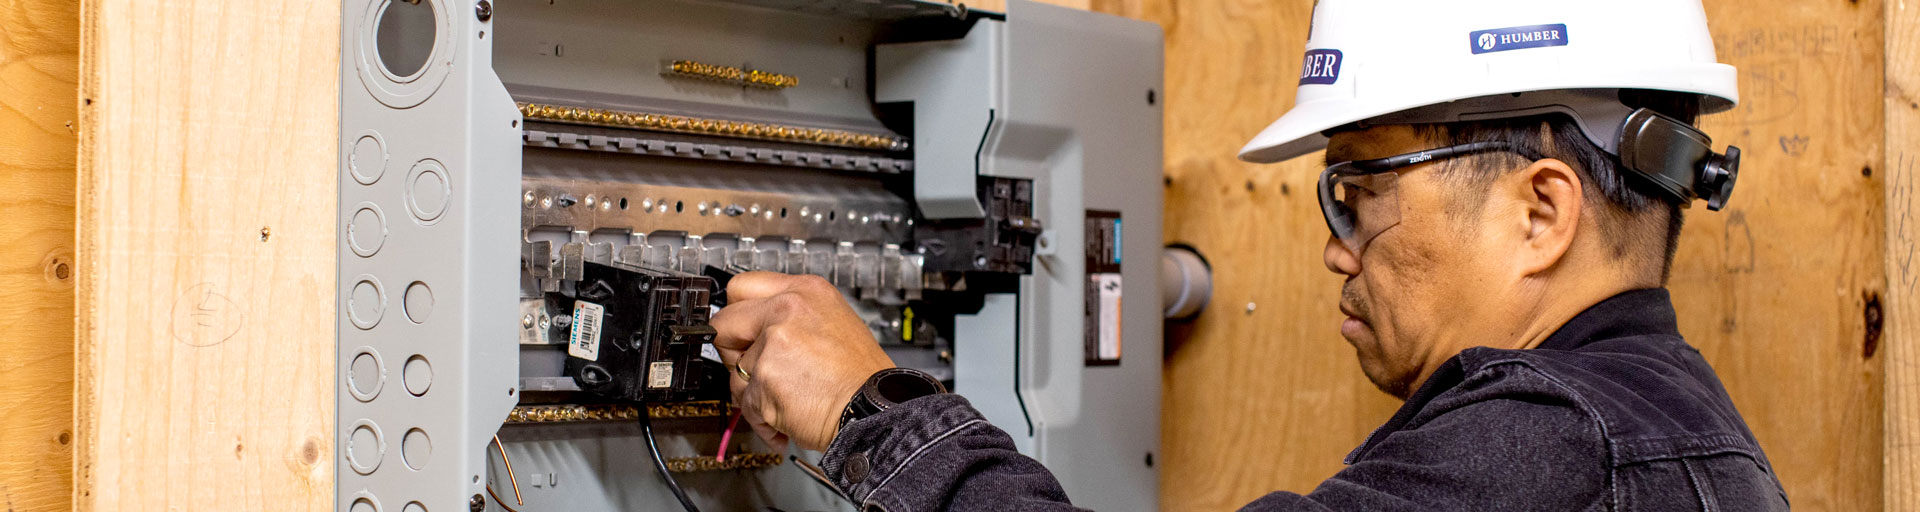 Person working in electrical panel